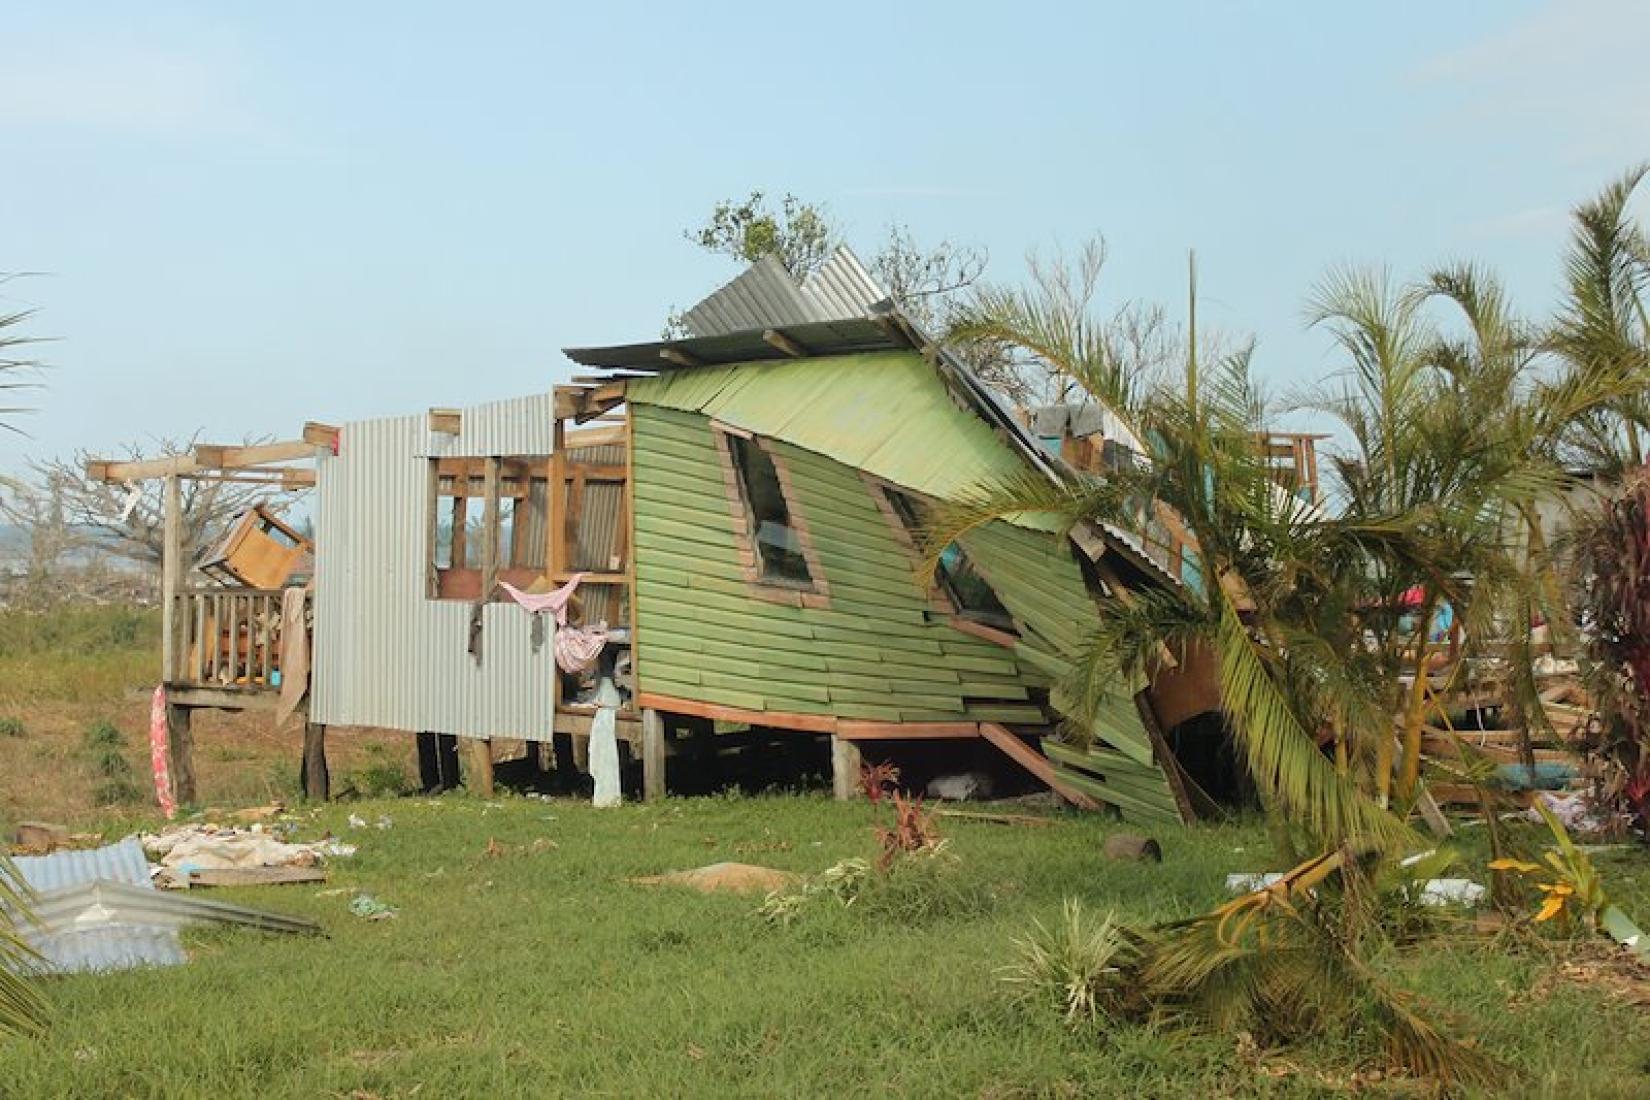 Damage from tropical cyclone Winston that struck Fiji in 2016. Image: DFAT